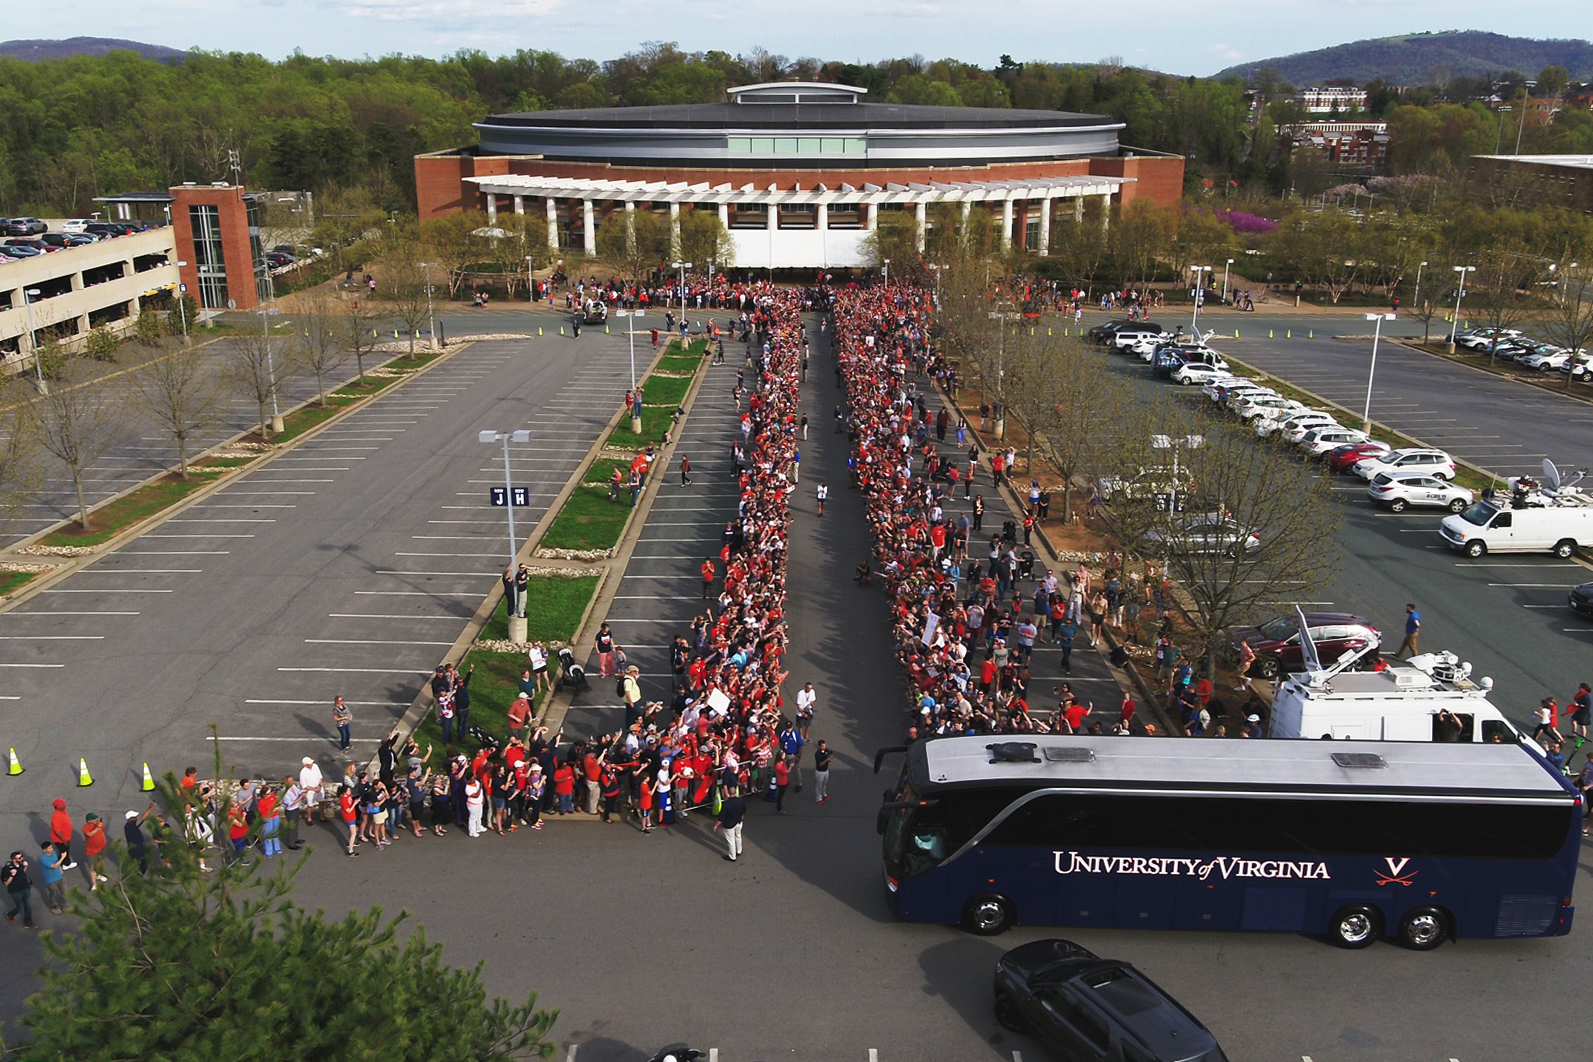 UVA bus carrying the basketball team pulls up to a parking lot lined with cheering fans